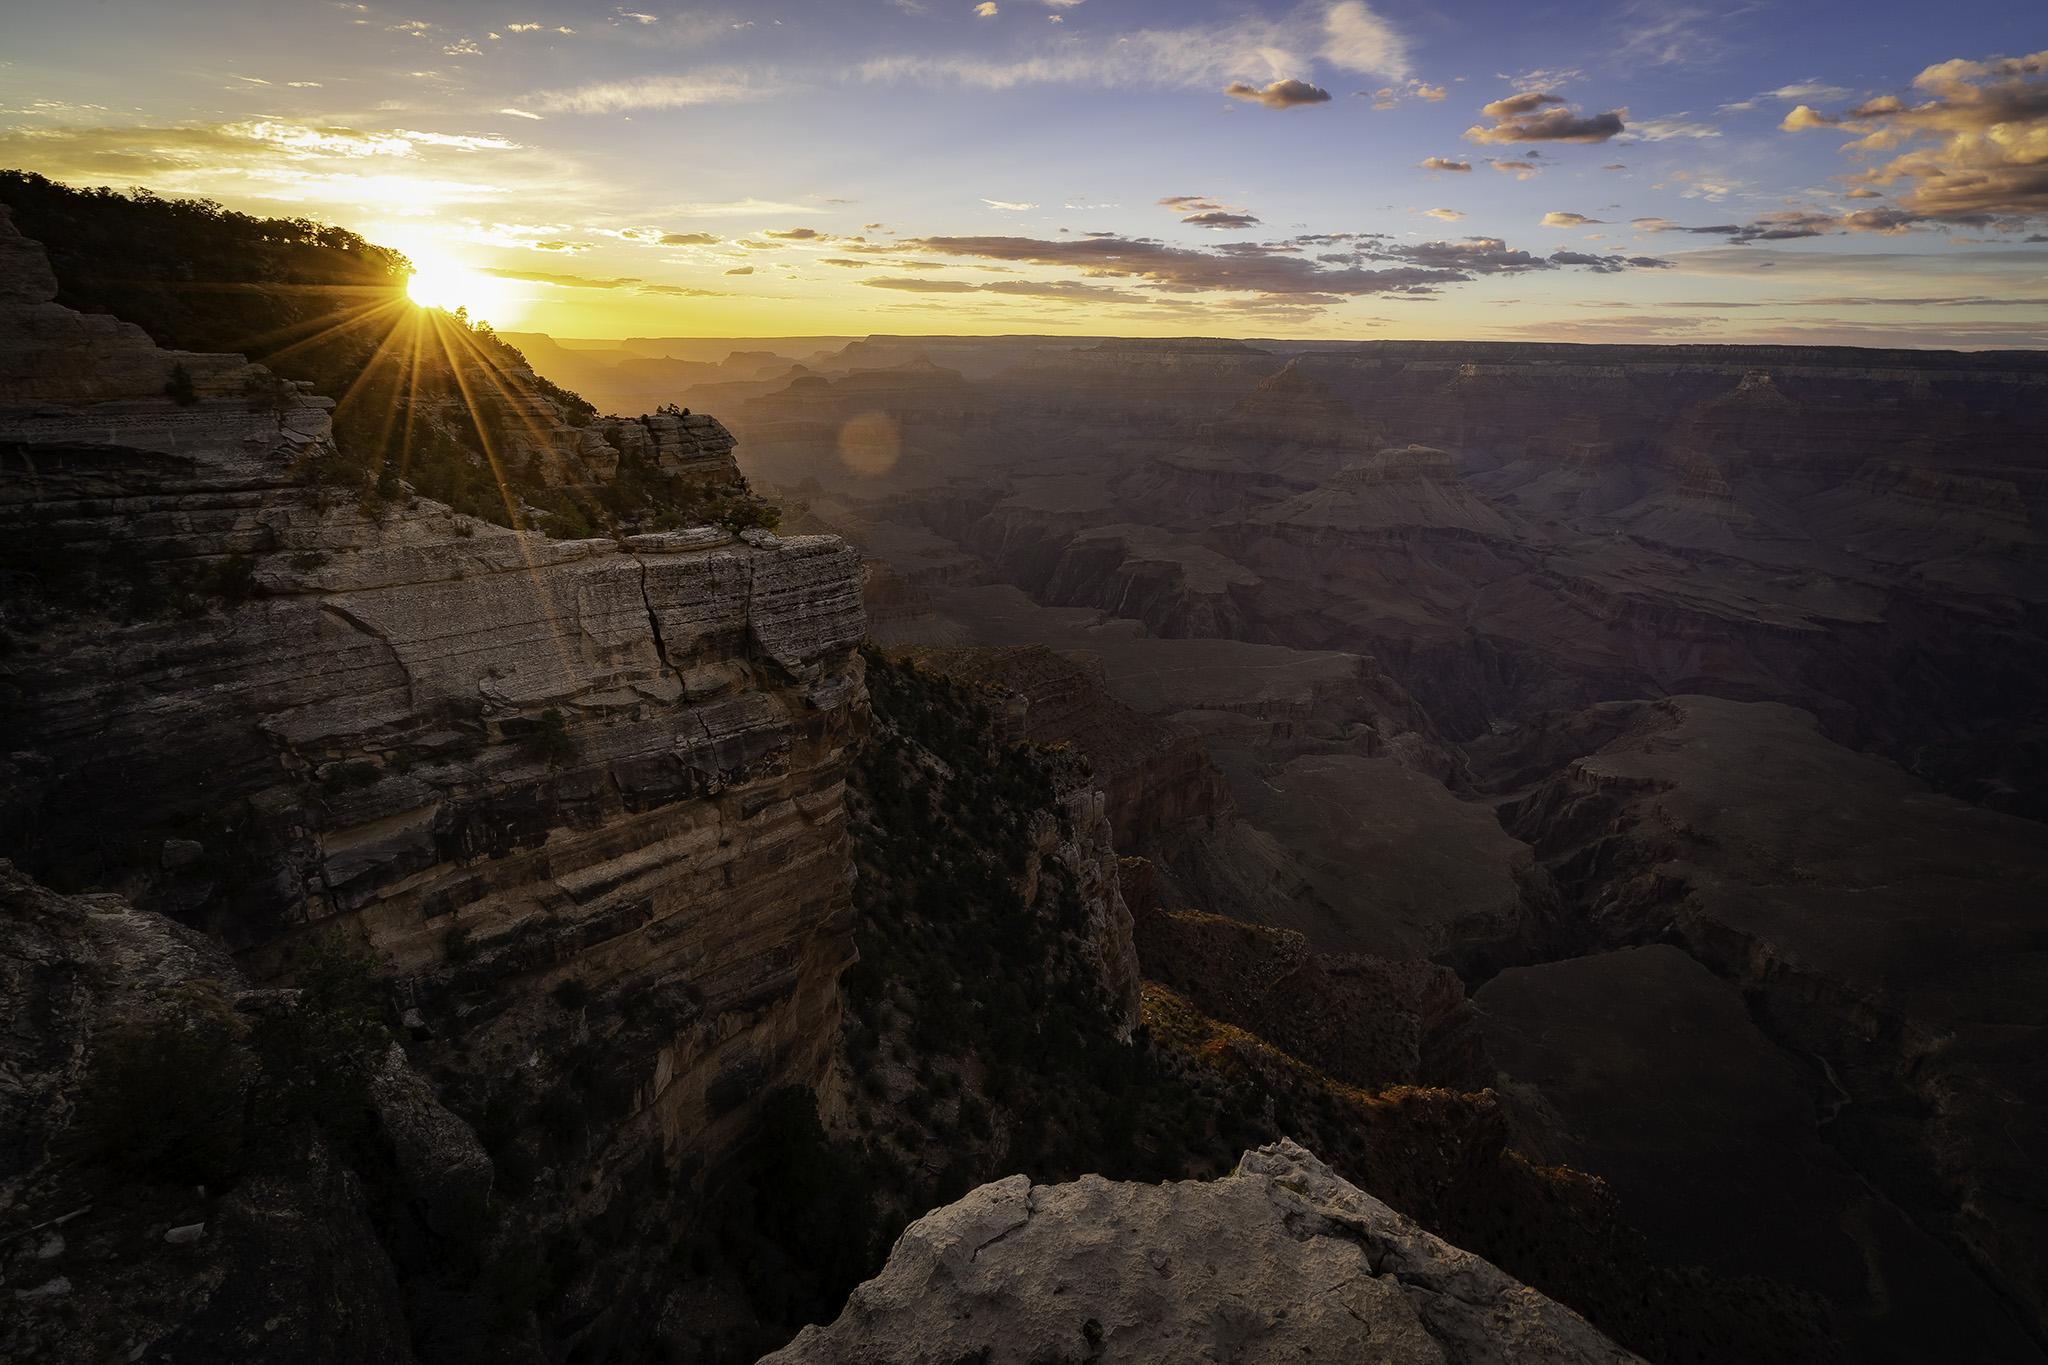 Sunset at Mather Point, Grand Canyon National Park.